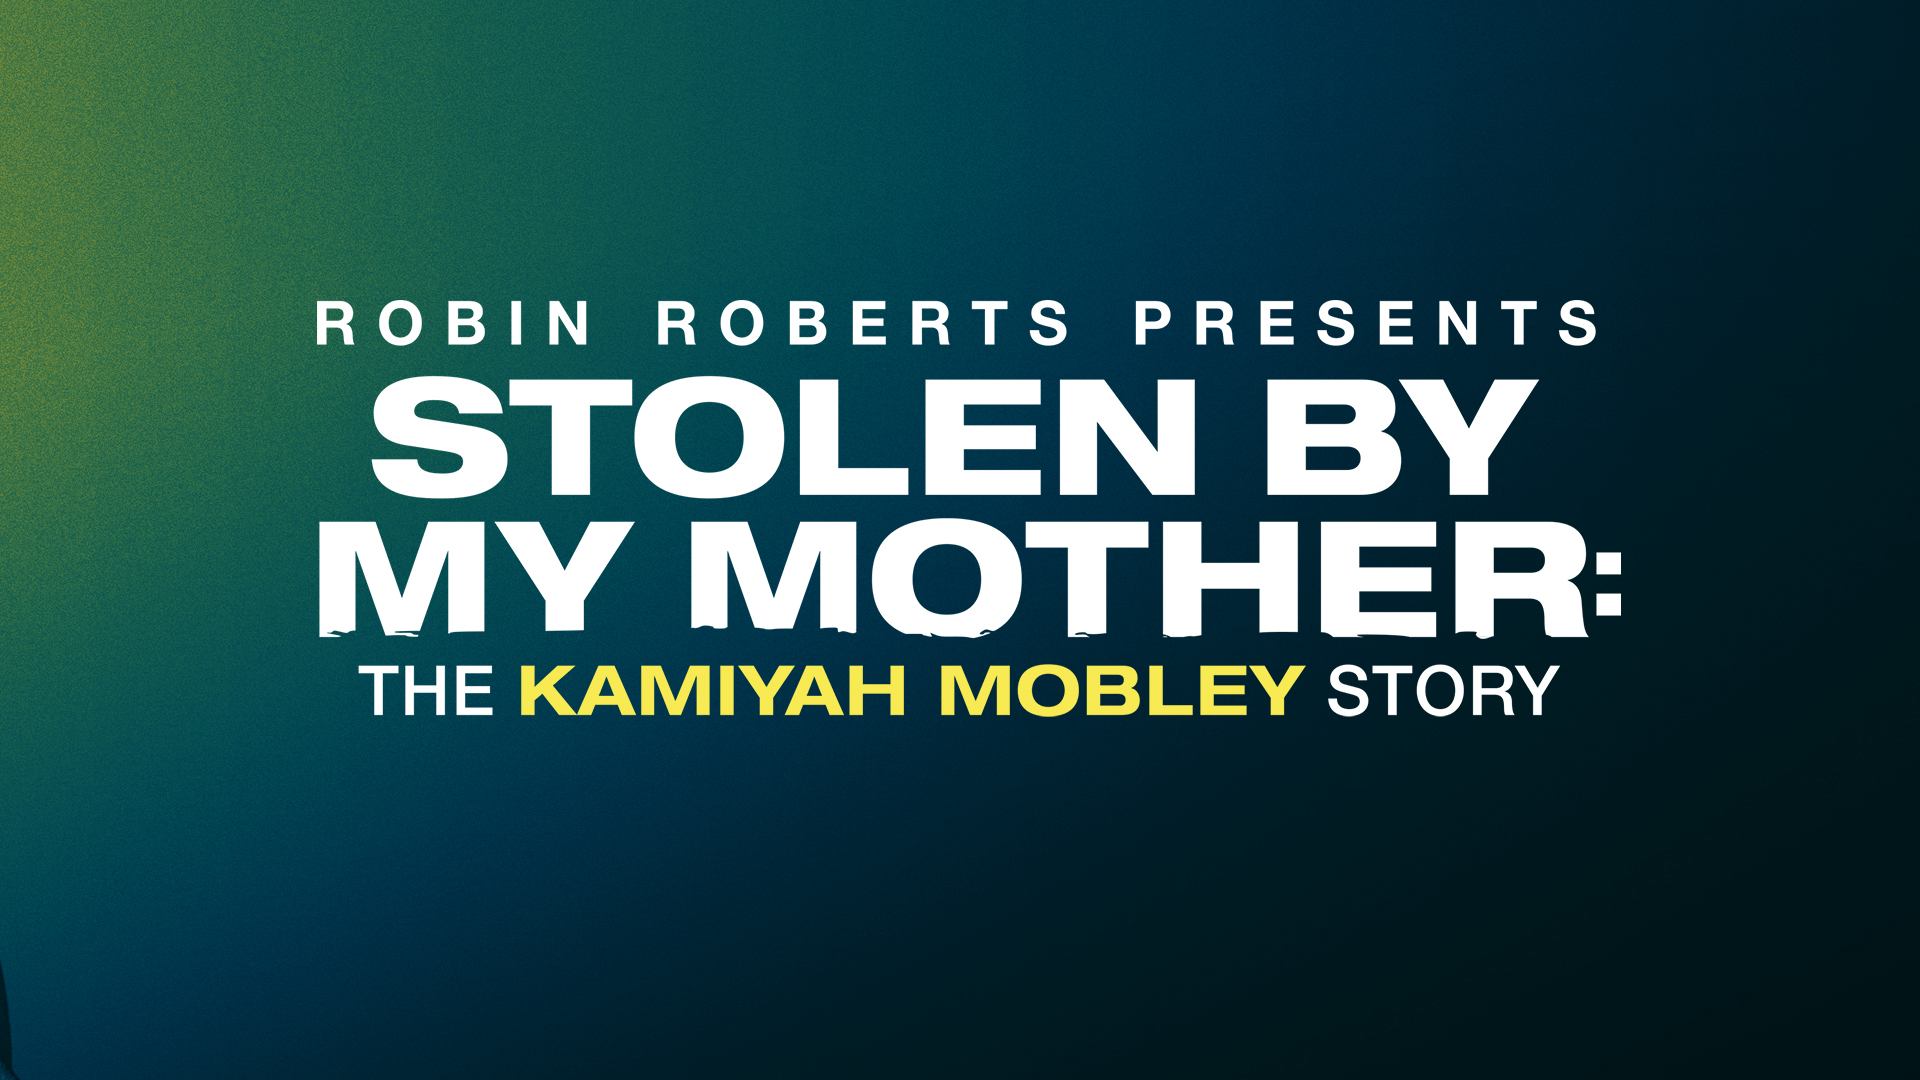 Robin Roberts Presents - Stolen By My Mother: The Kamiyah Mobley Story